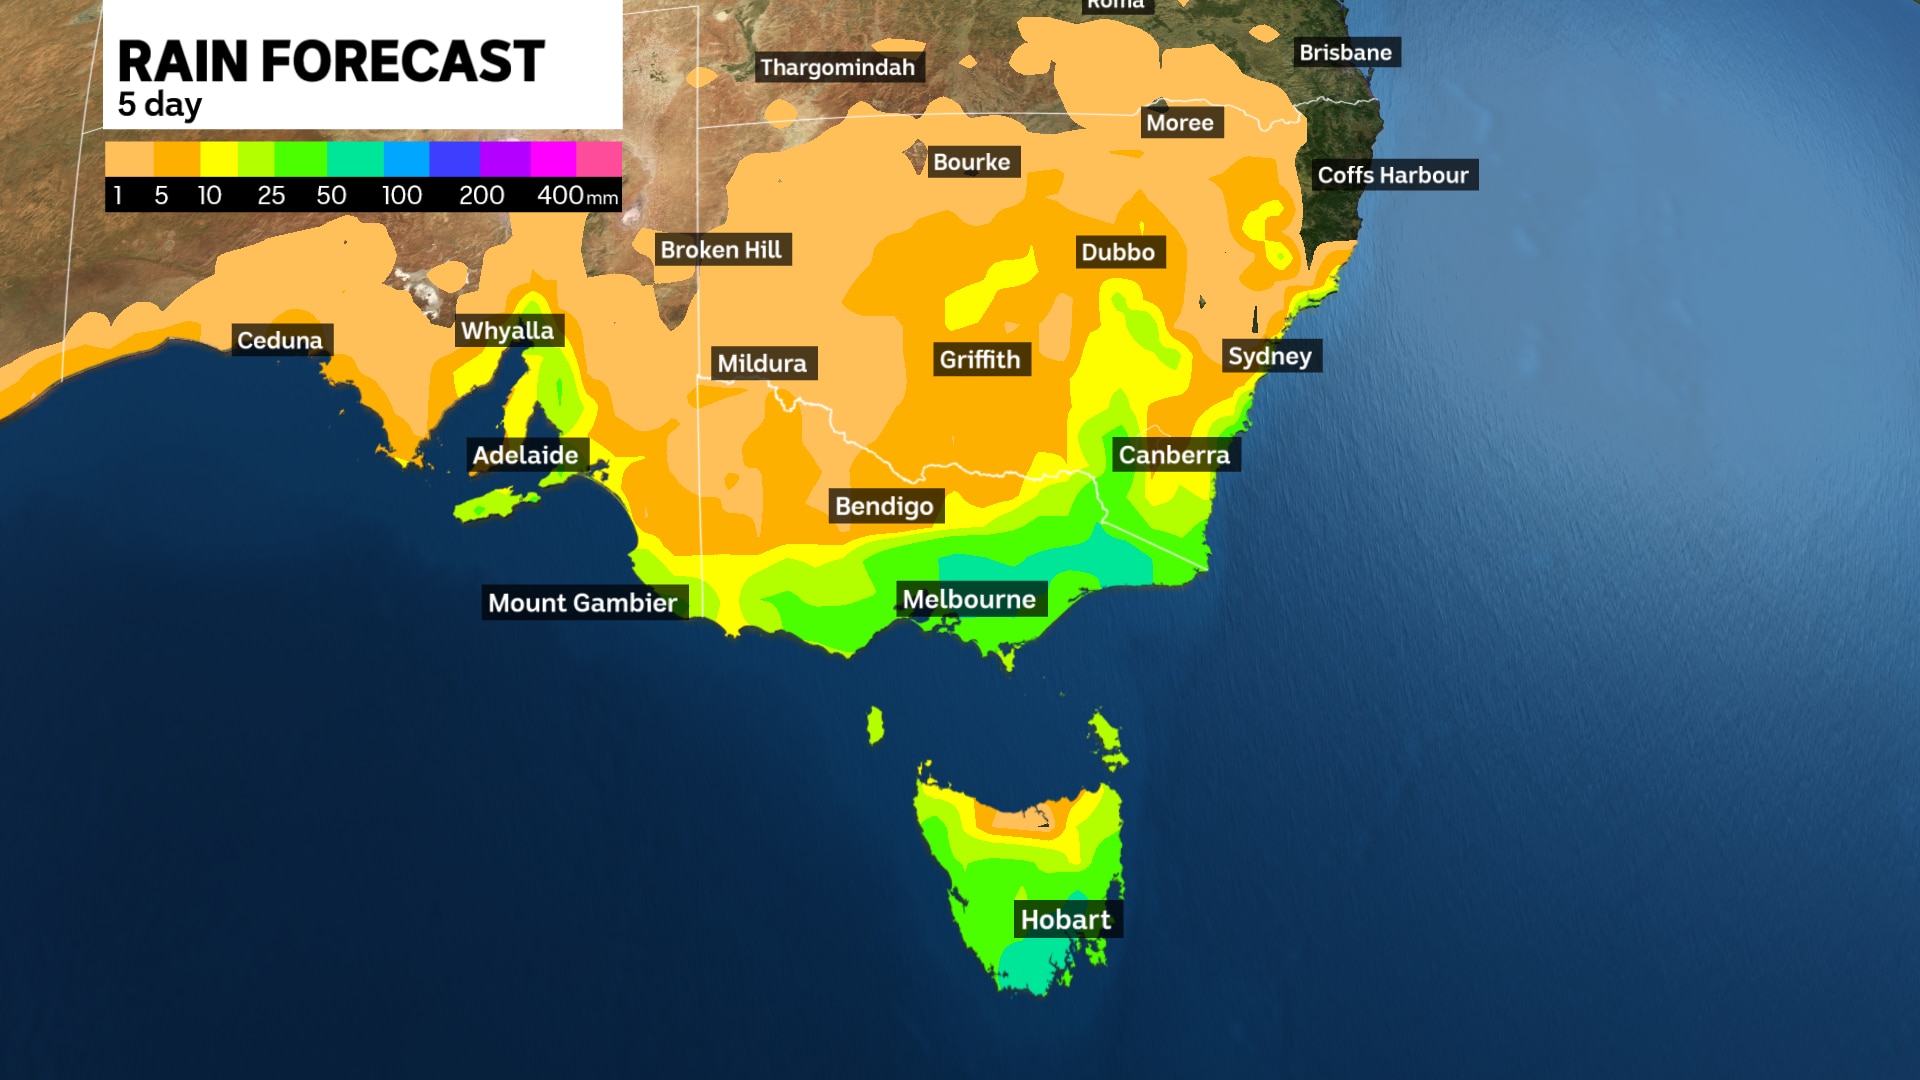 a weather map showing projected rain falls for the southern parts of australia